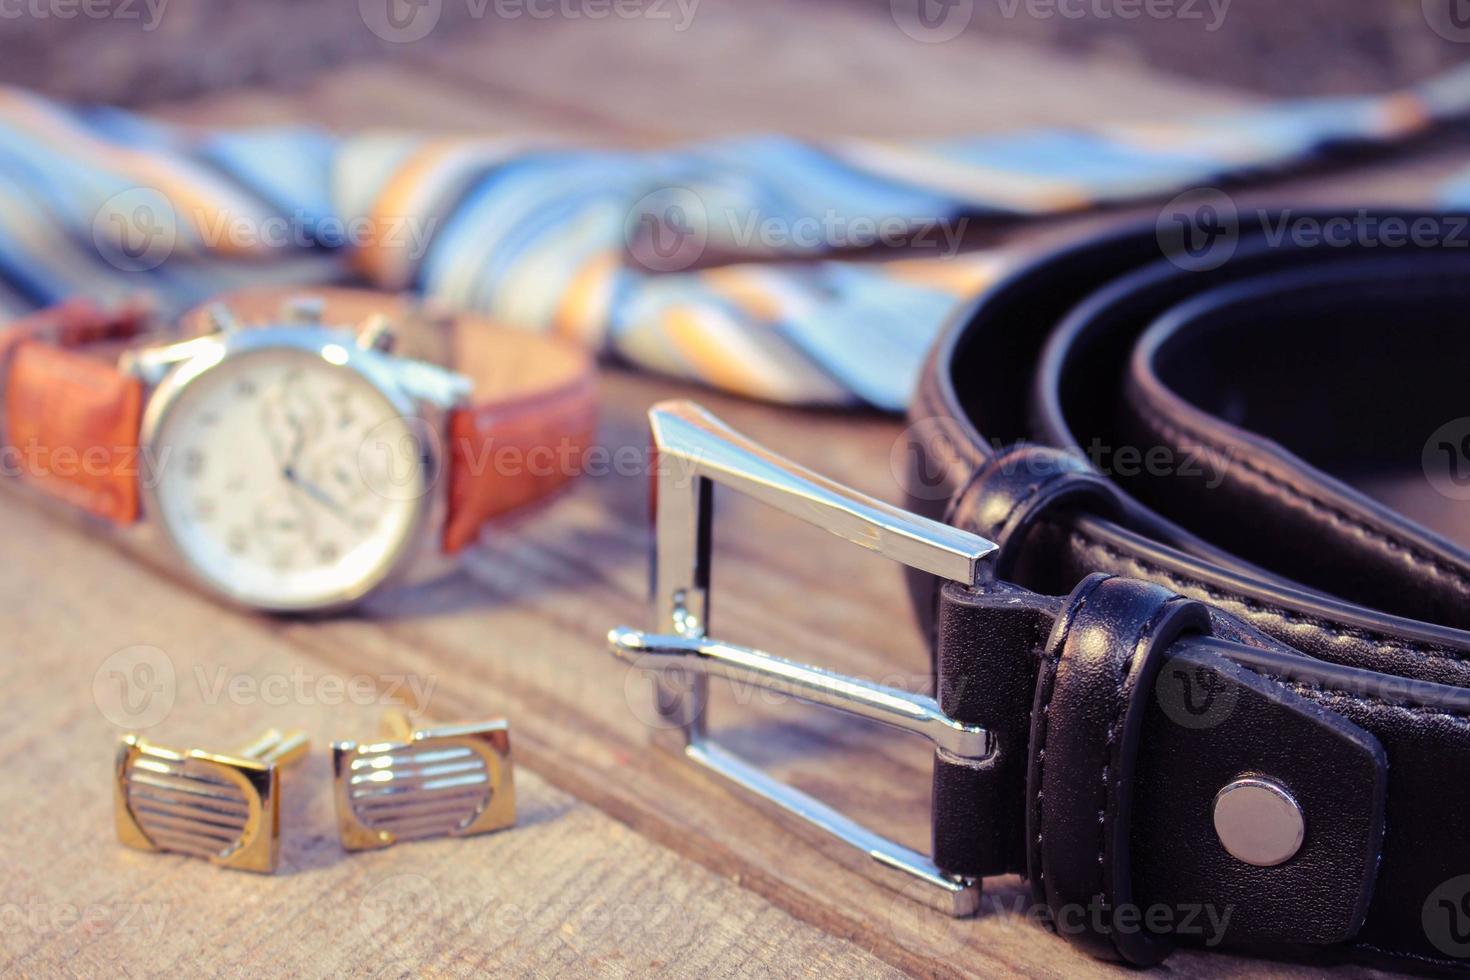 Leather belt, tie, cufflinks and watches photo